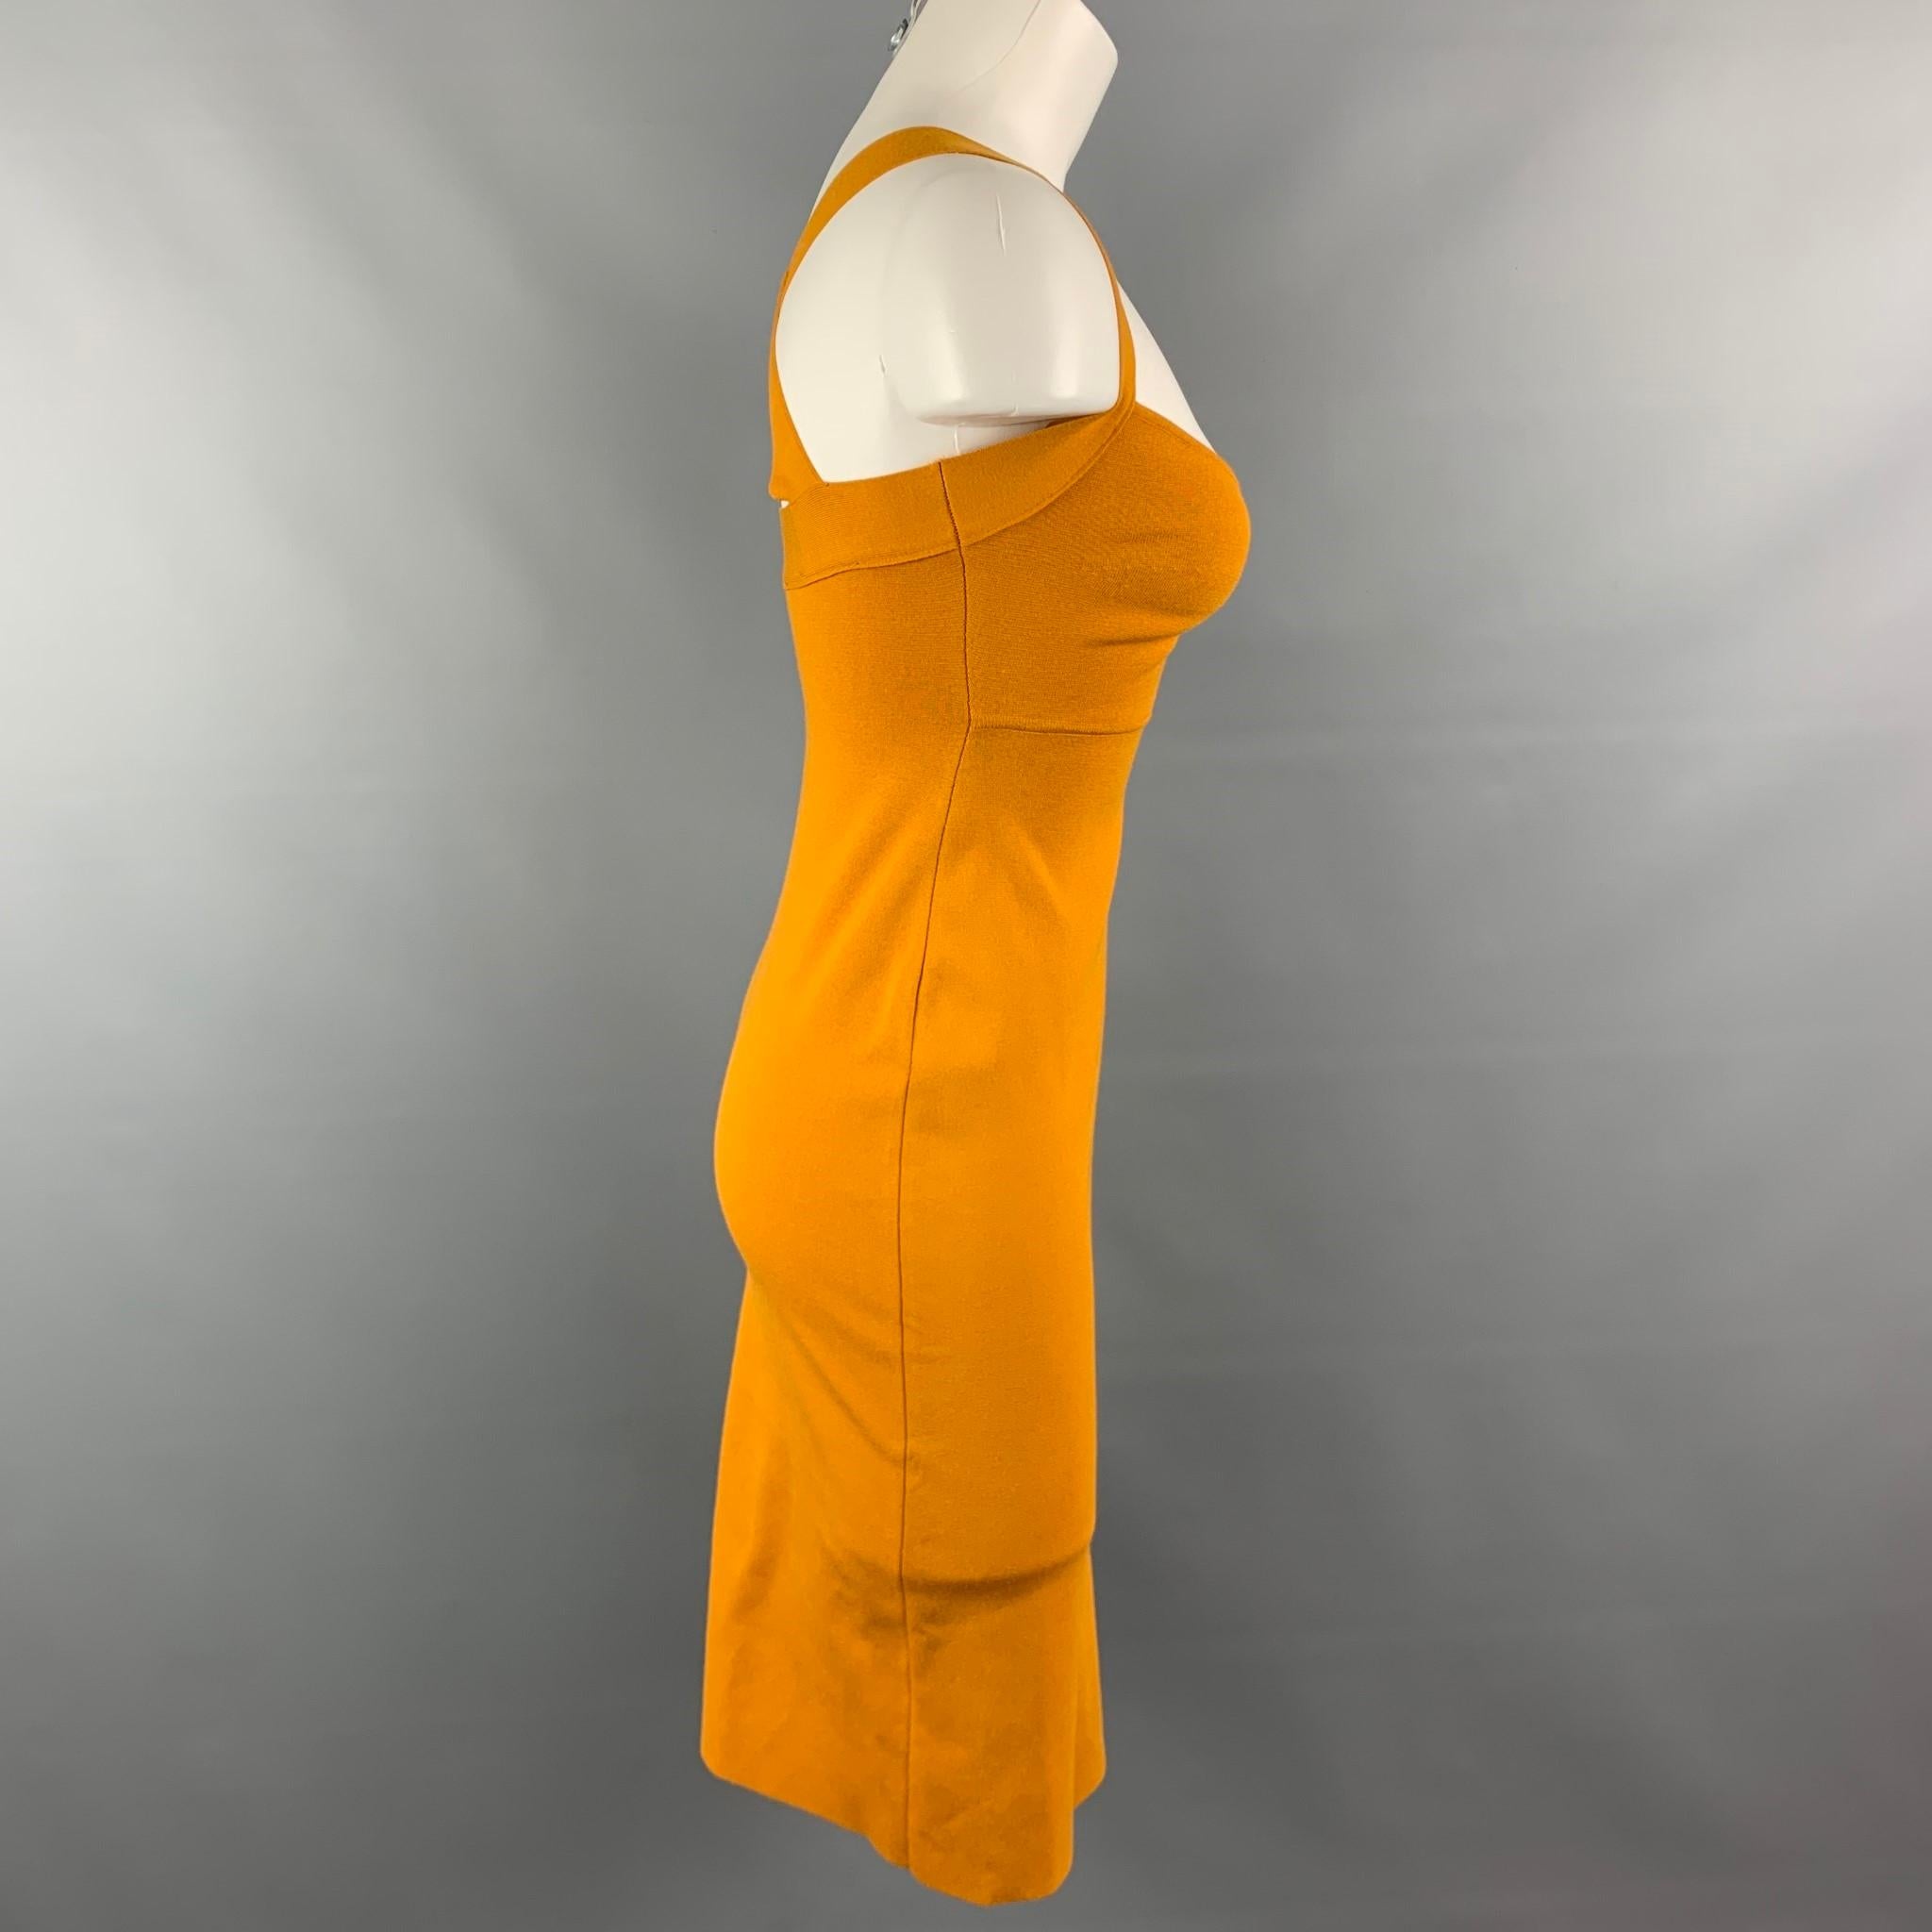 ZEYNEP ARCAY cocktail dress comes in a mustard stretch viscose featuring a criss-cross back strap, stretch fit, and a side slit.

Good Pre-Owned Condition.
Marked: FR 36 / IT 40 / US 4 / UK 8

Measurements:

Bust: 24 in.
Waist: 26 in. 
Hip: 30